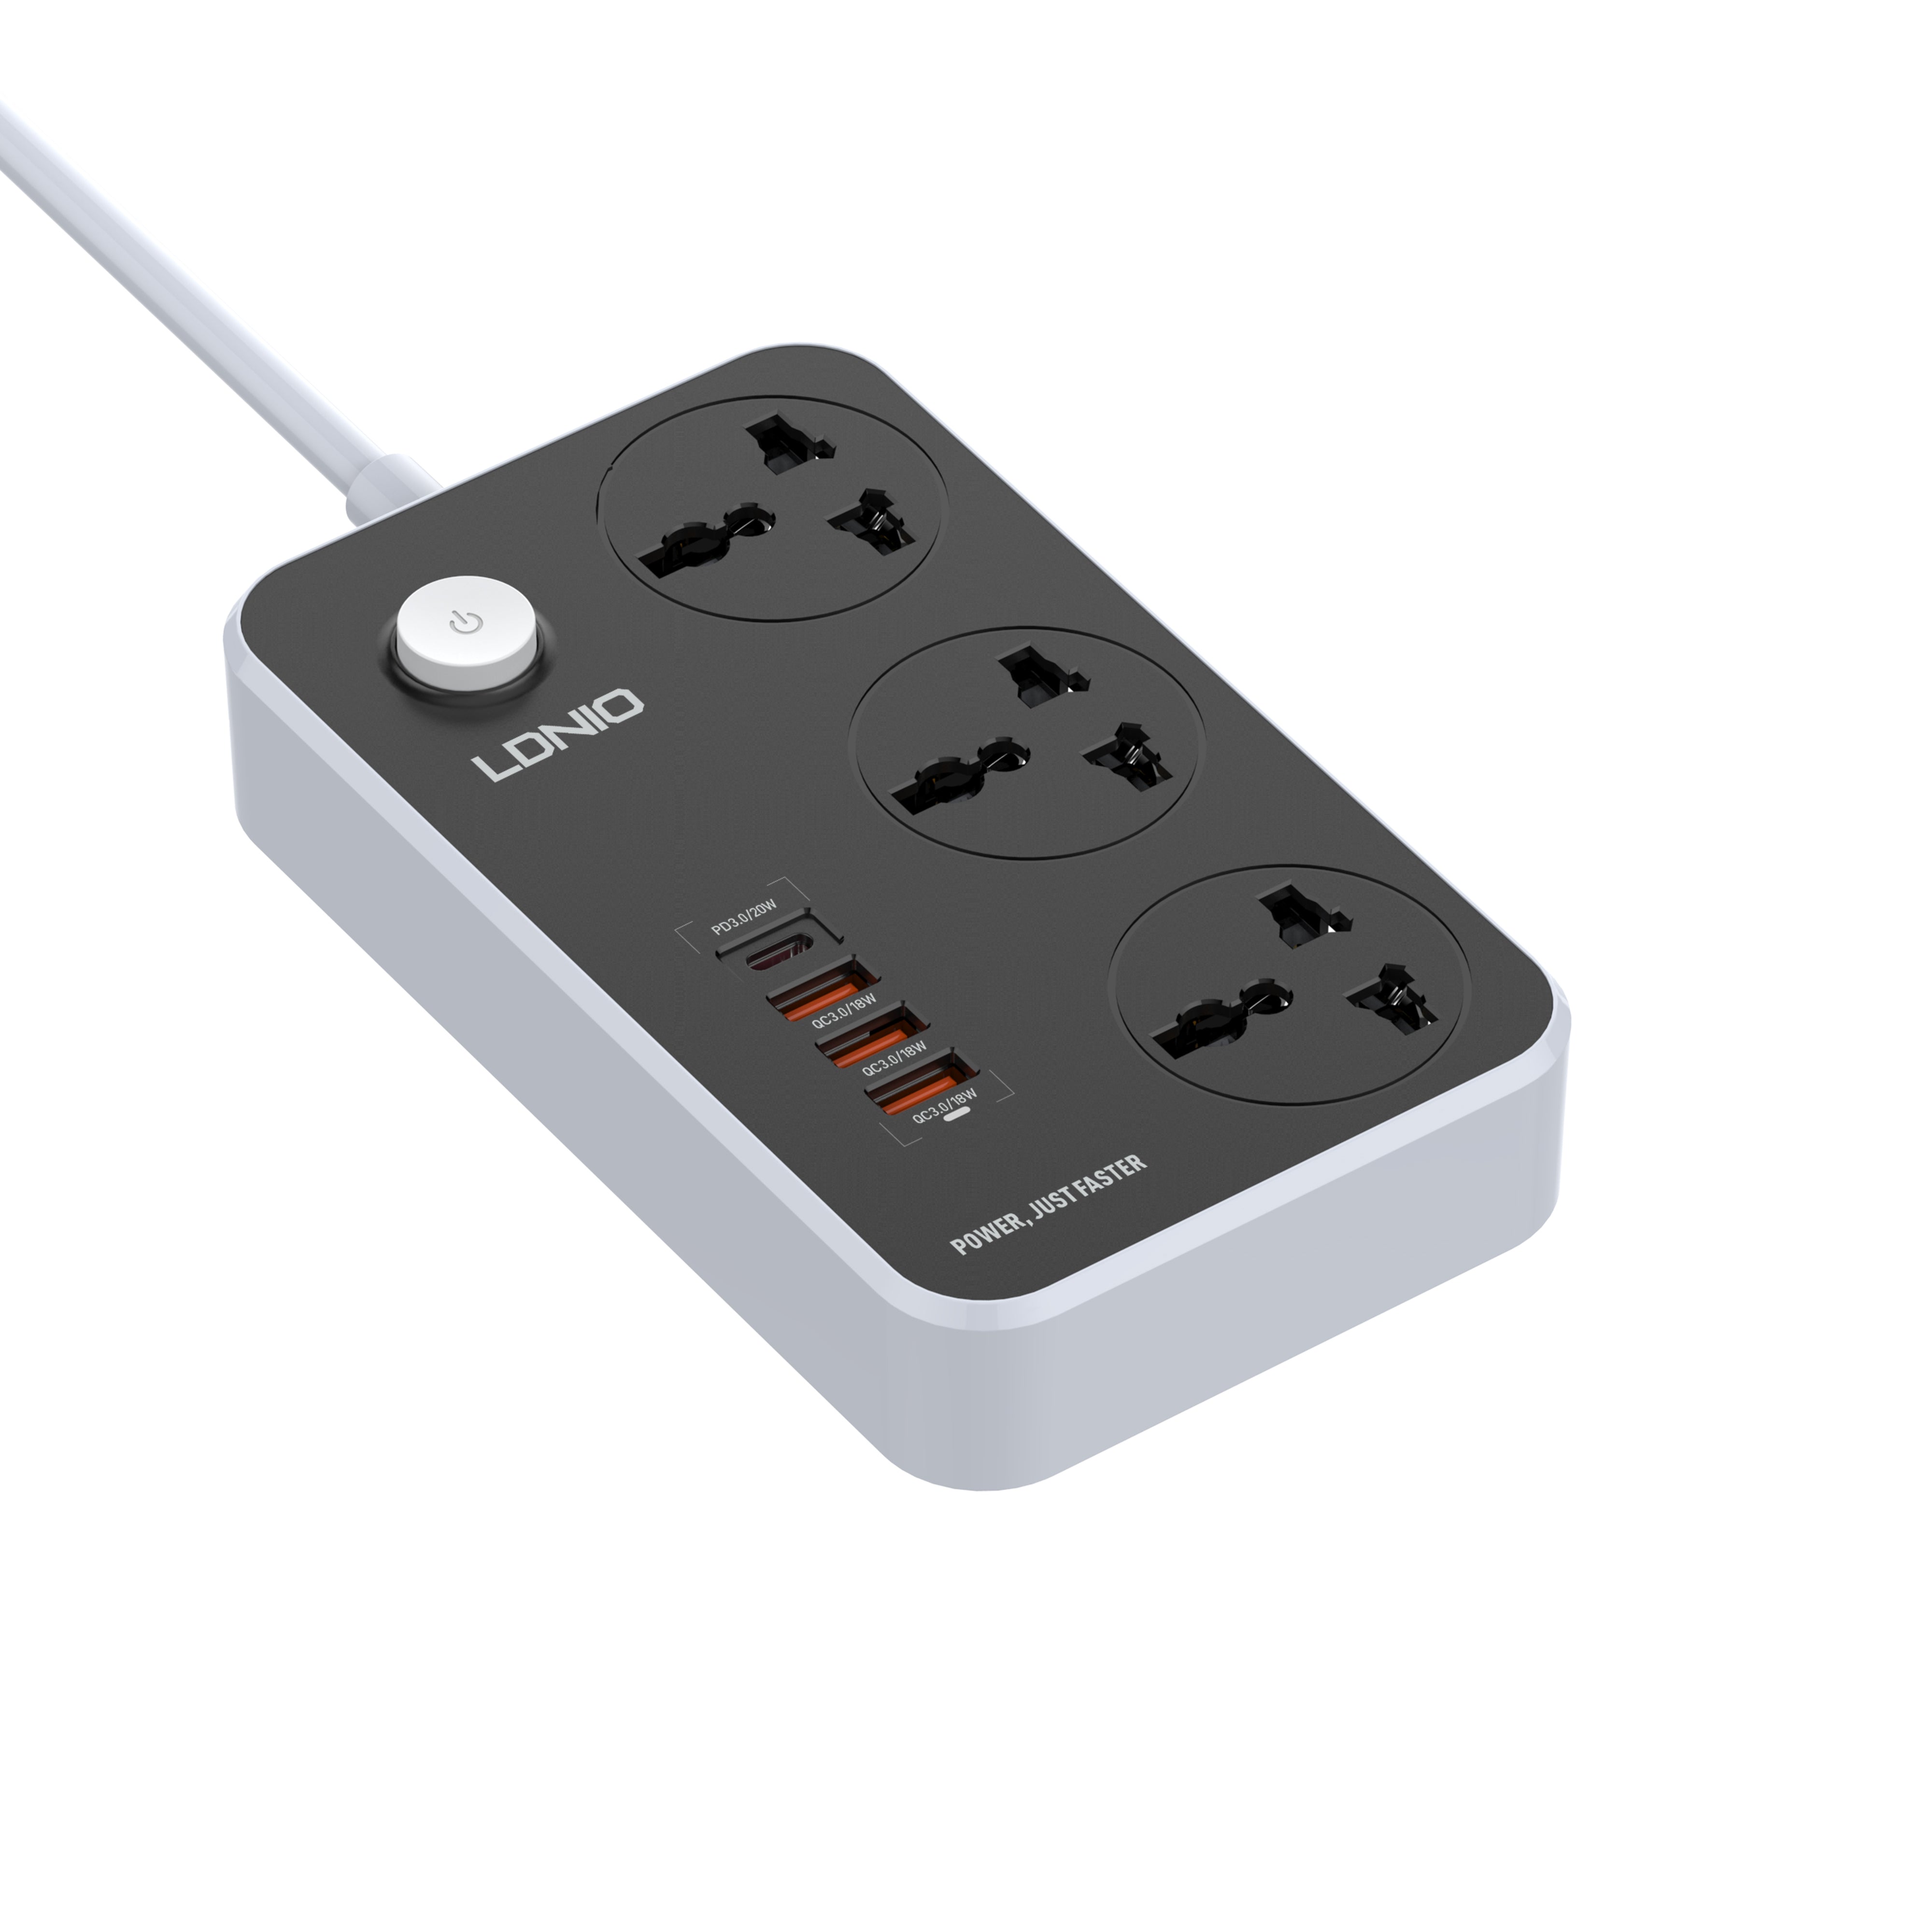 LDNIO Super Fast Charging Power Strip With 3 USB Ports and Type-C Port | Shopna Online Store .